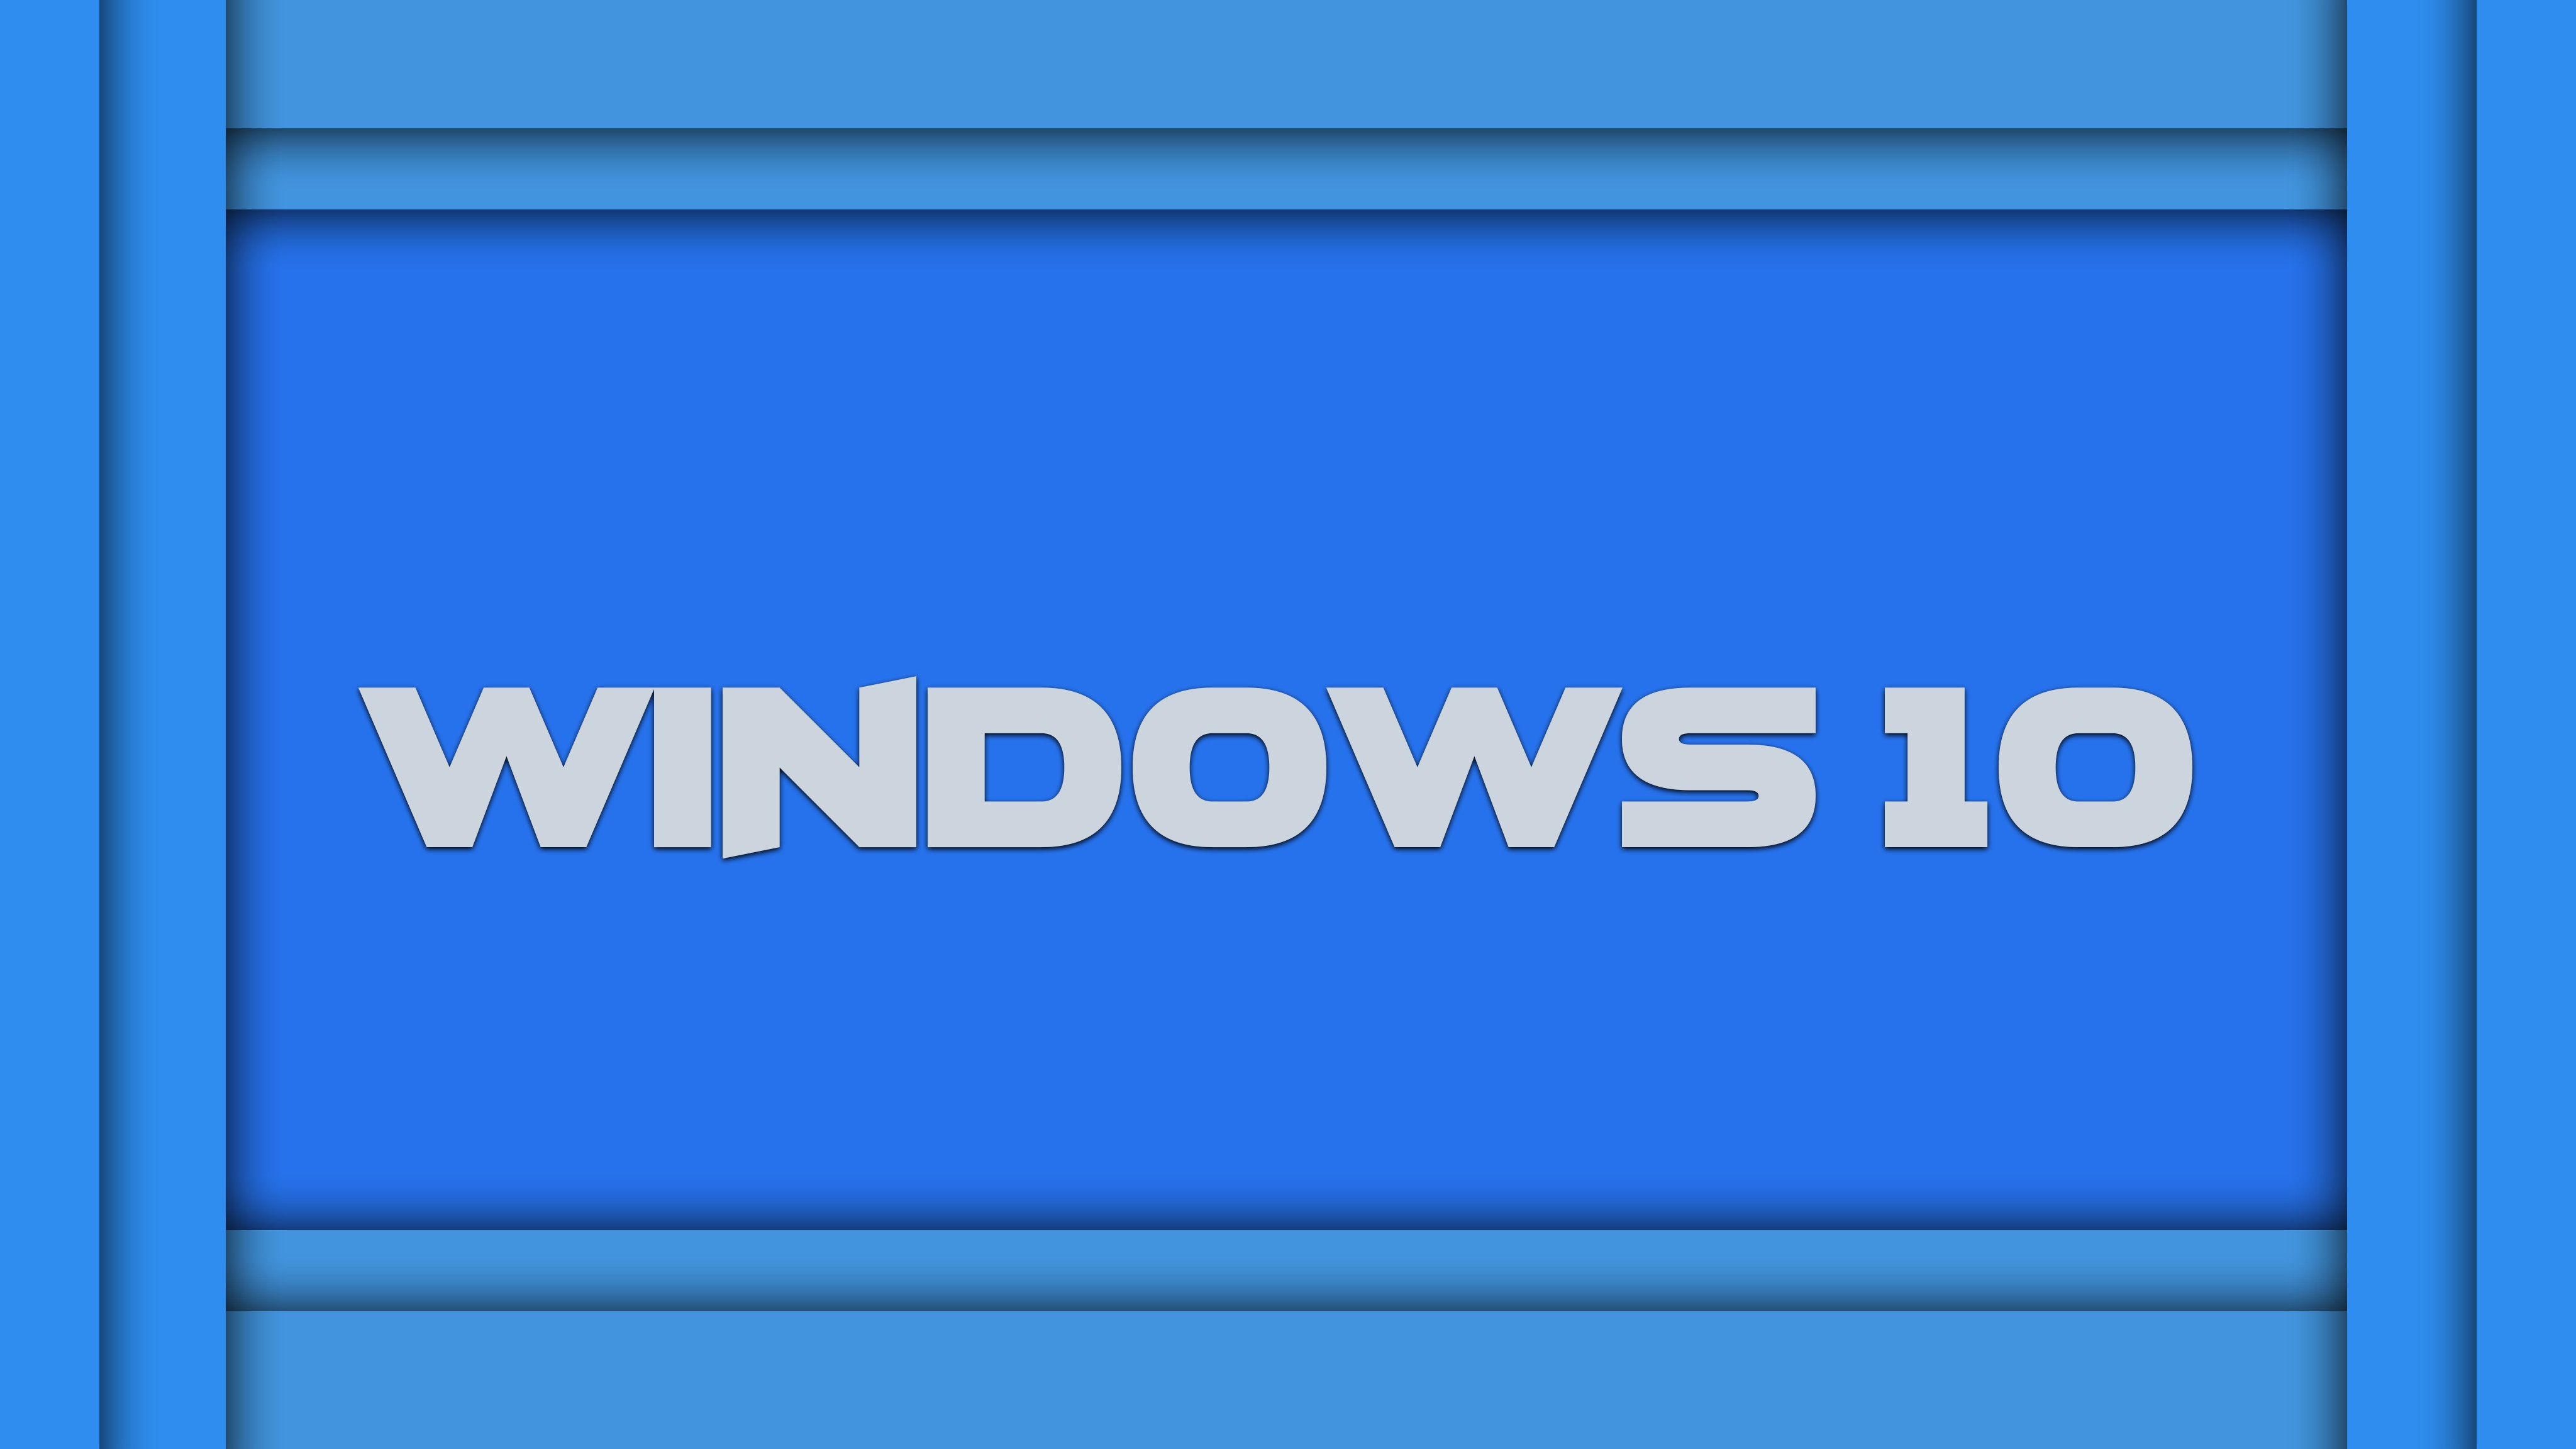 Windows 10, Operating systems, Computer Wallpaper